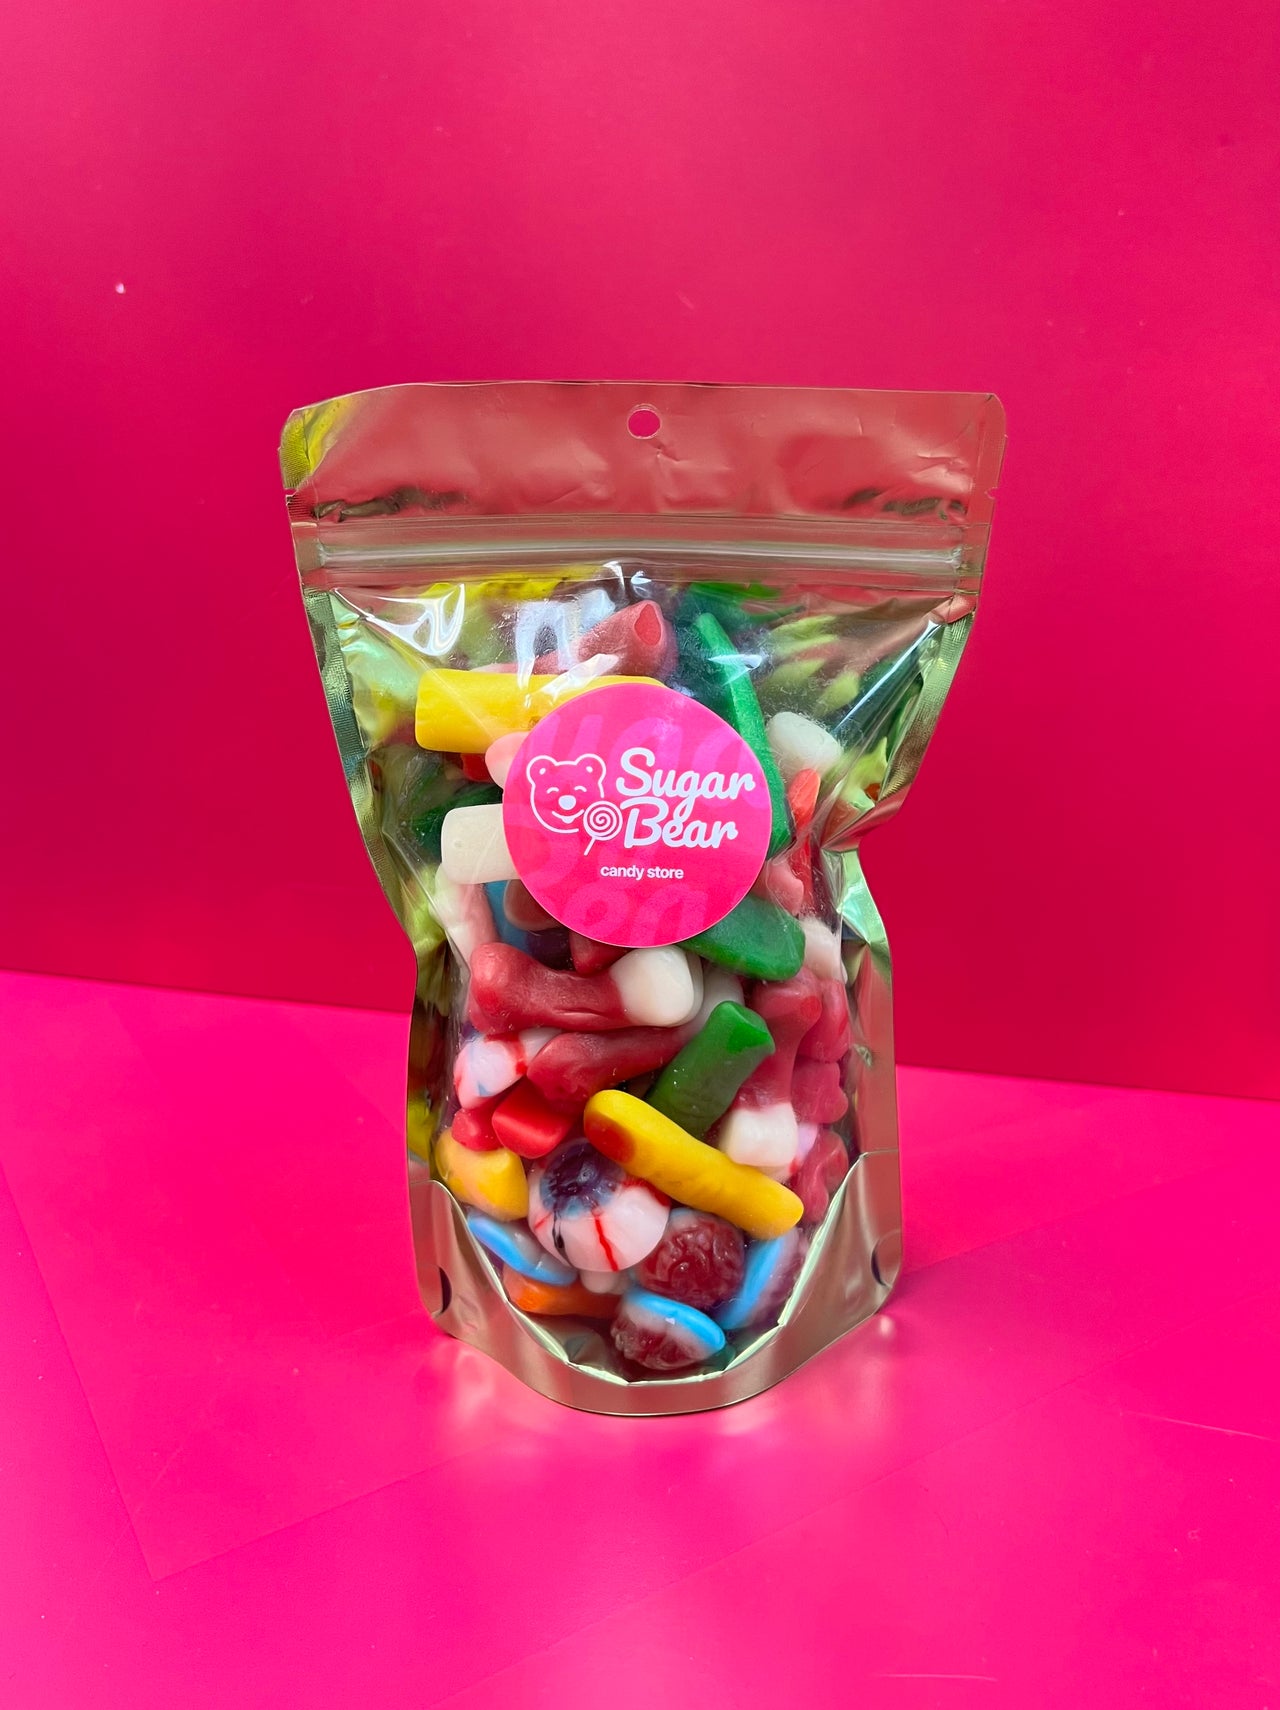 Missing Body Parts Candy: A Ghoulishly Tasty Halloween Treat